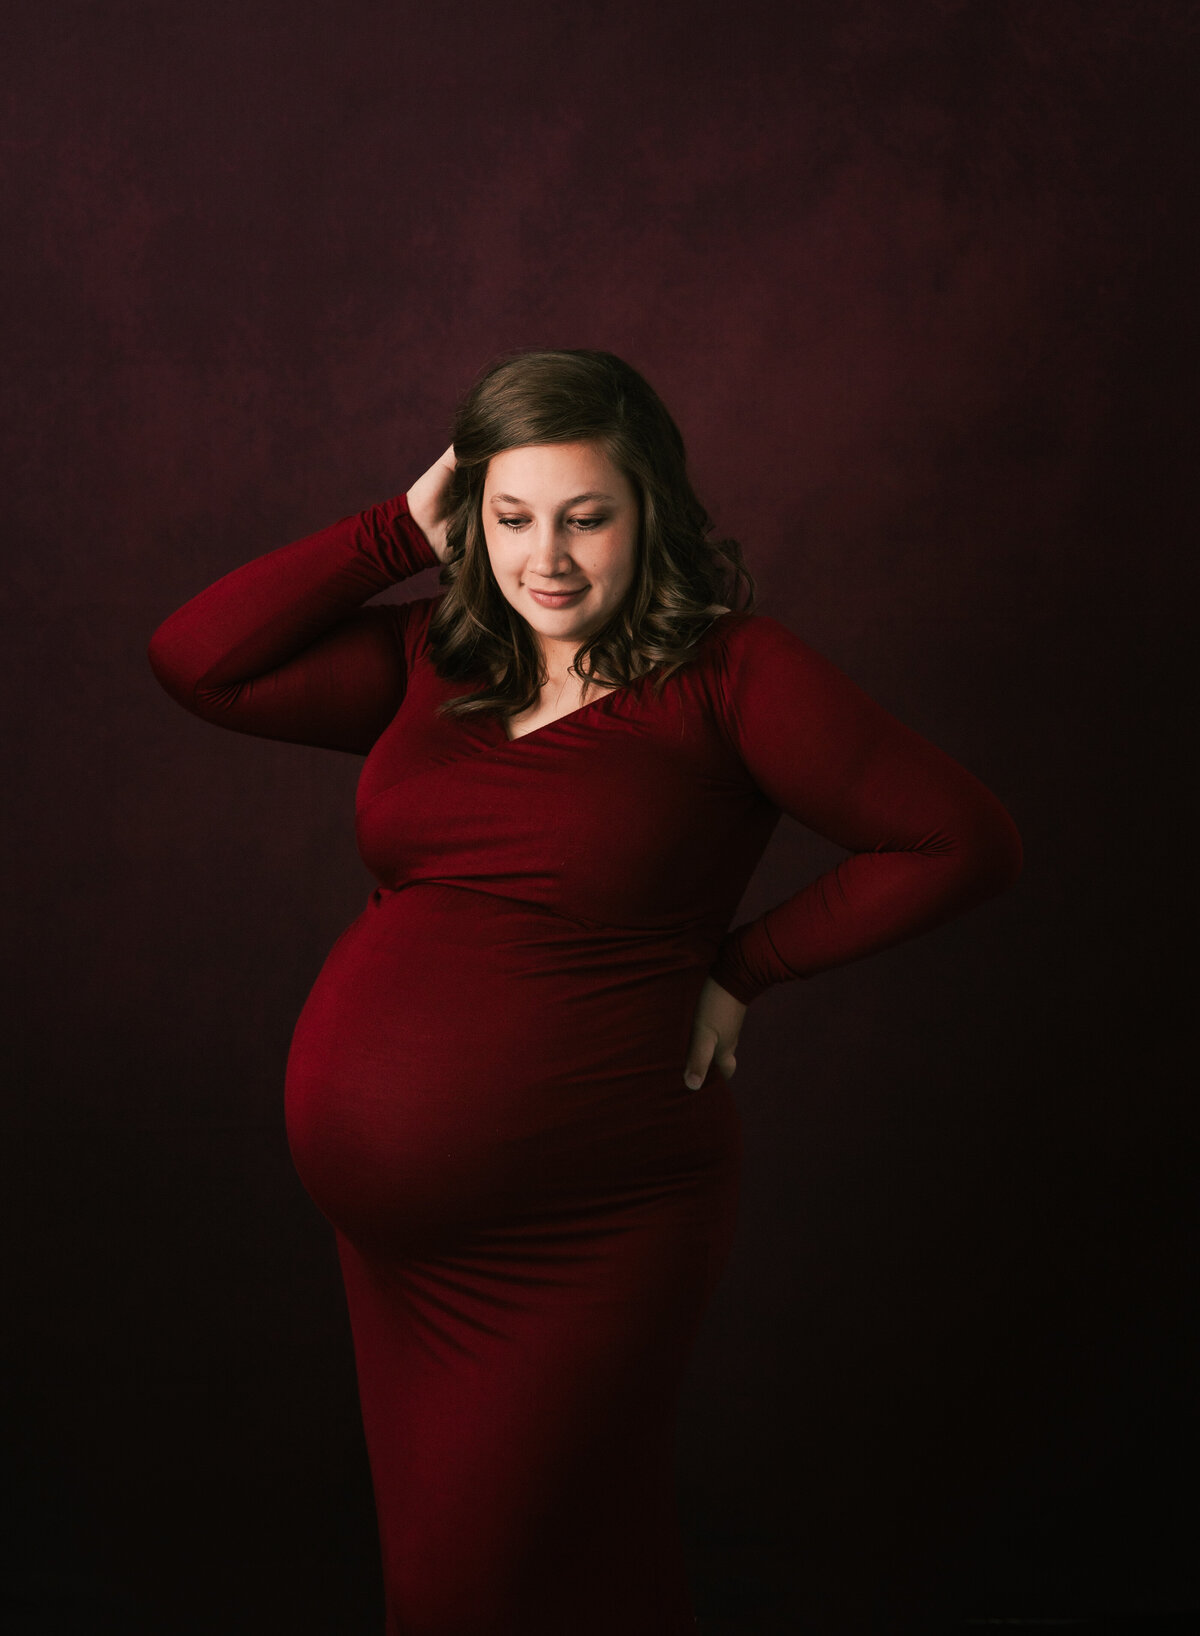 A beautiful pregnant mom brushes her hair back in her studio portrait by Diane Owen.